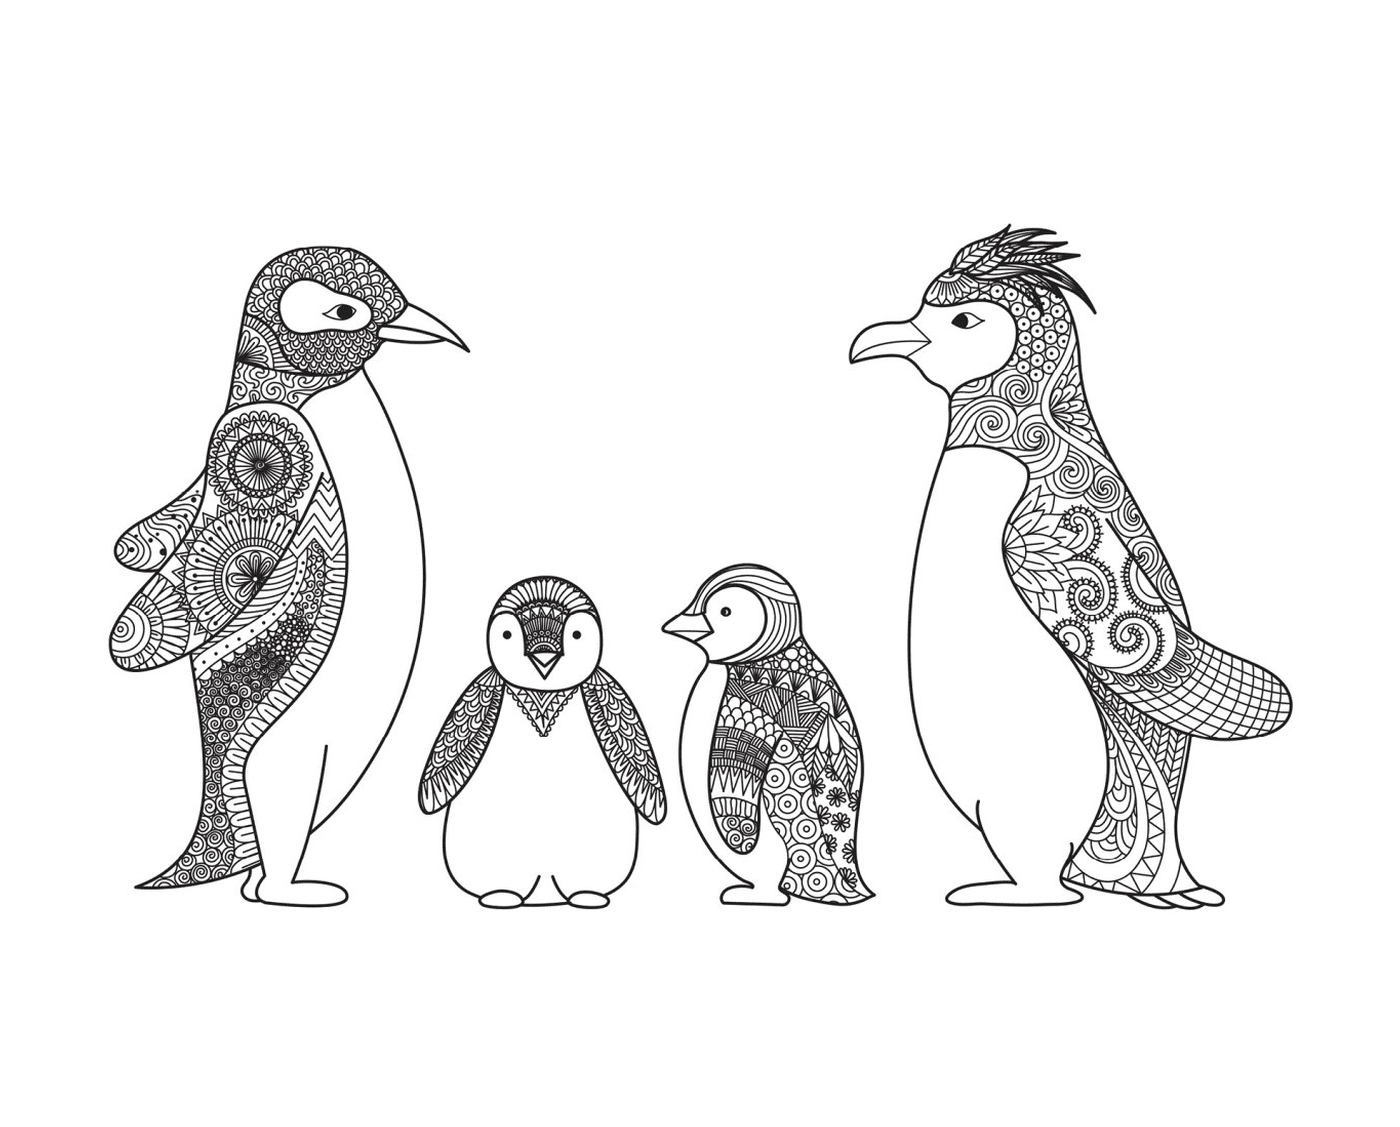  Family drawing of penguins 